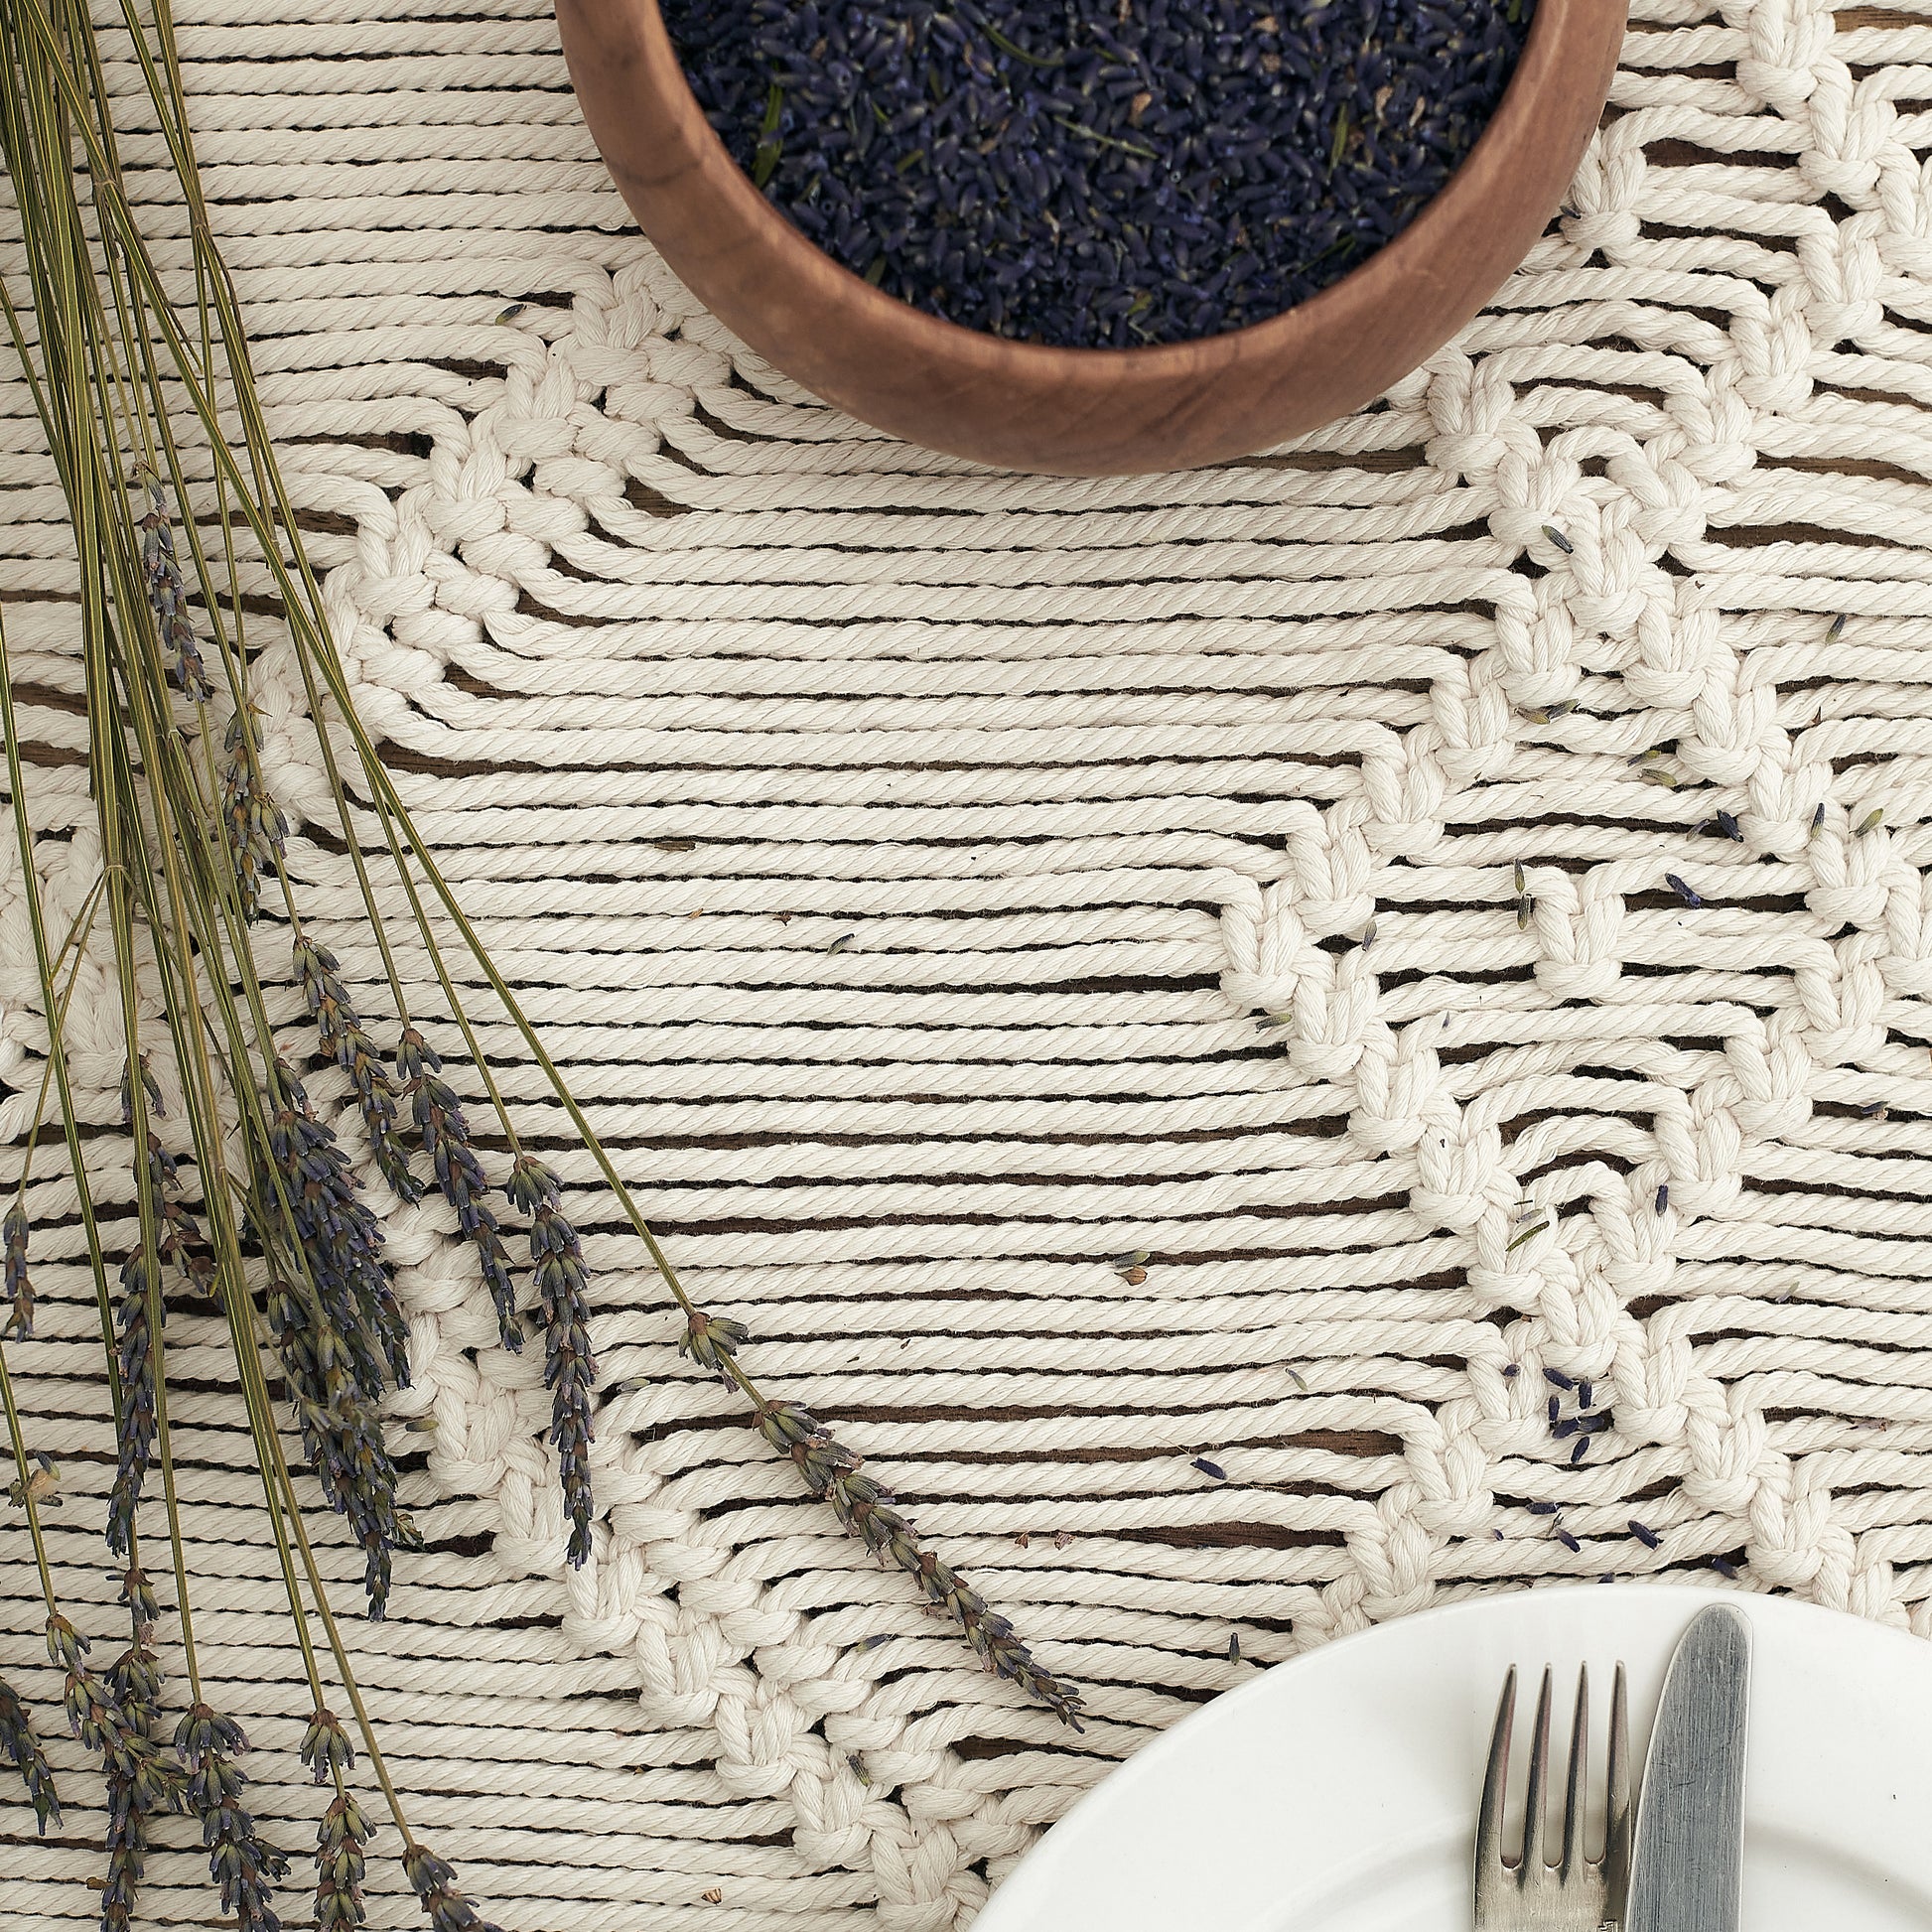 Natural white macrame table runner on a wooden table styled with rustic dried Lavender and pottery